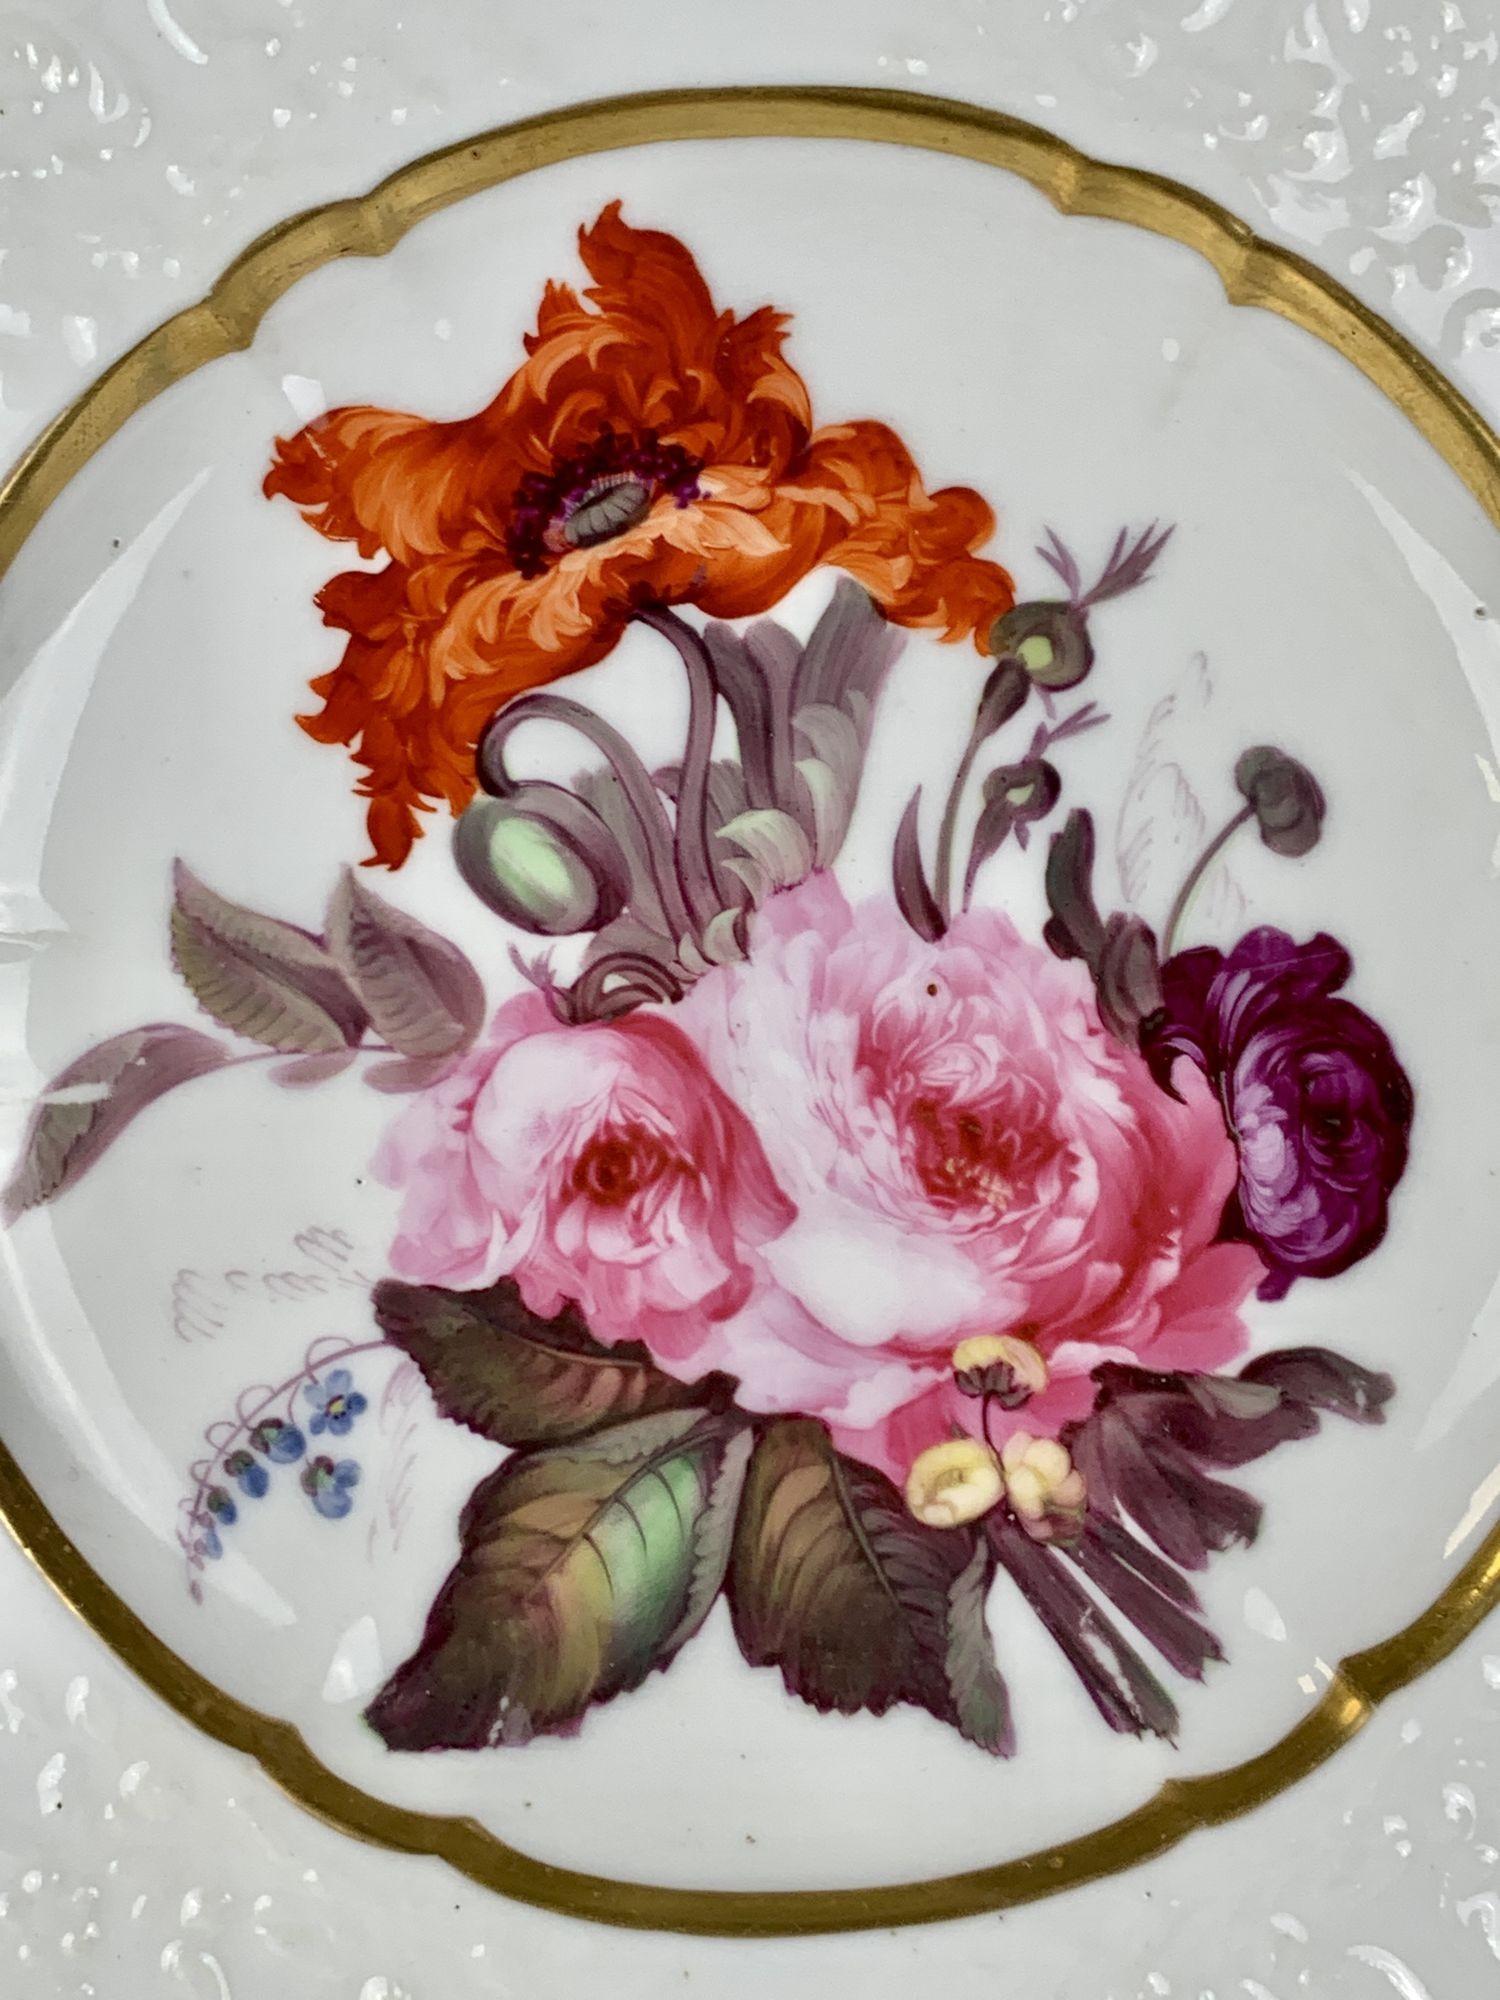 The dish is hand-painted with perfect pink and purple roses and a fabulous orange eastern poppy.
Around the center is a band of gilt. 
The border has impressed decoration of flowers and scrolling vines.
It is an altogether lovely